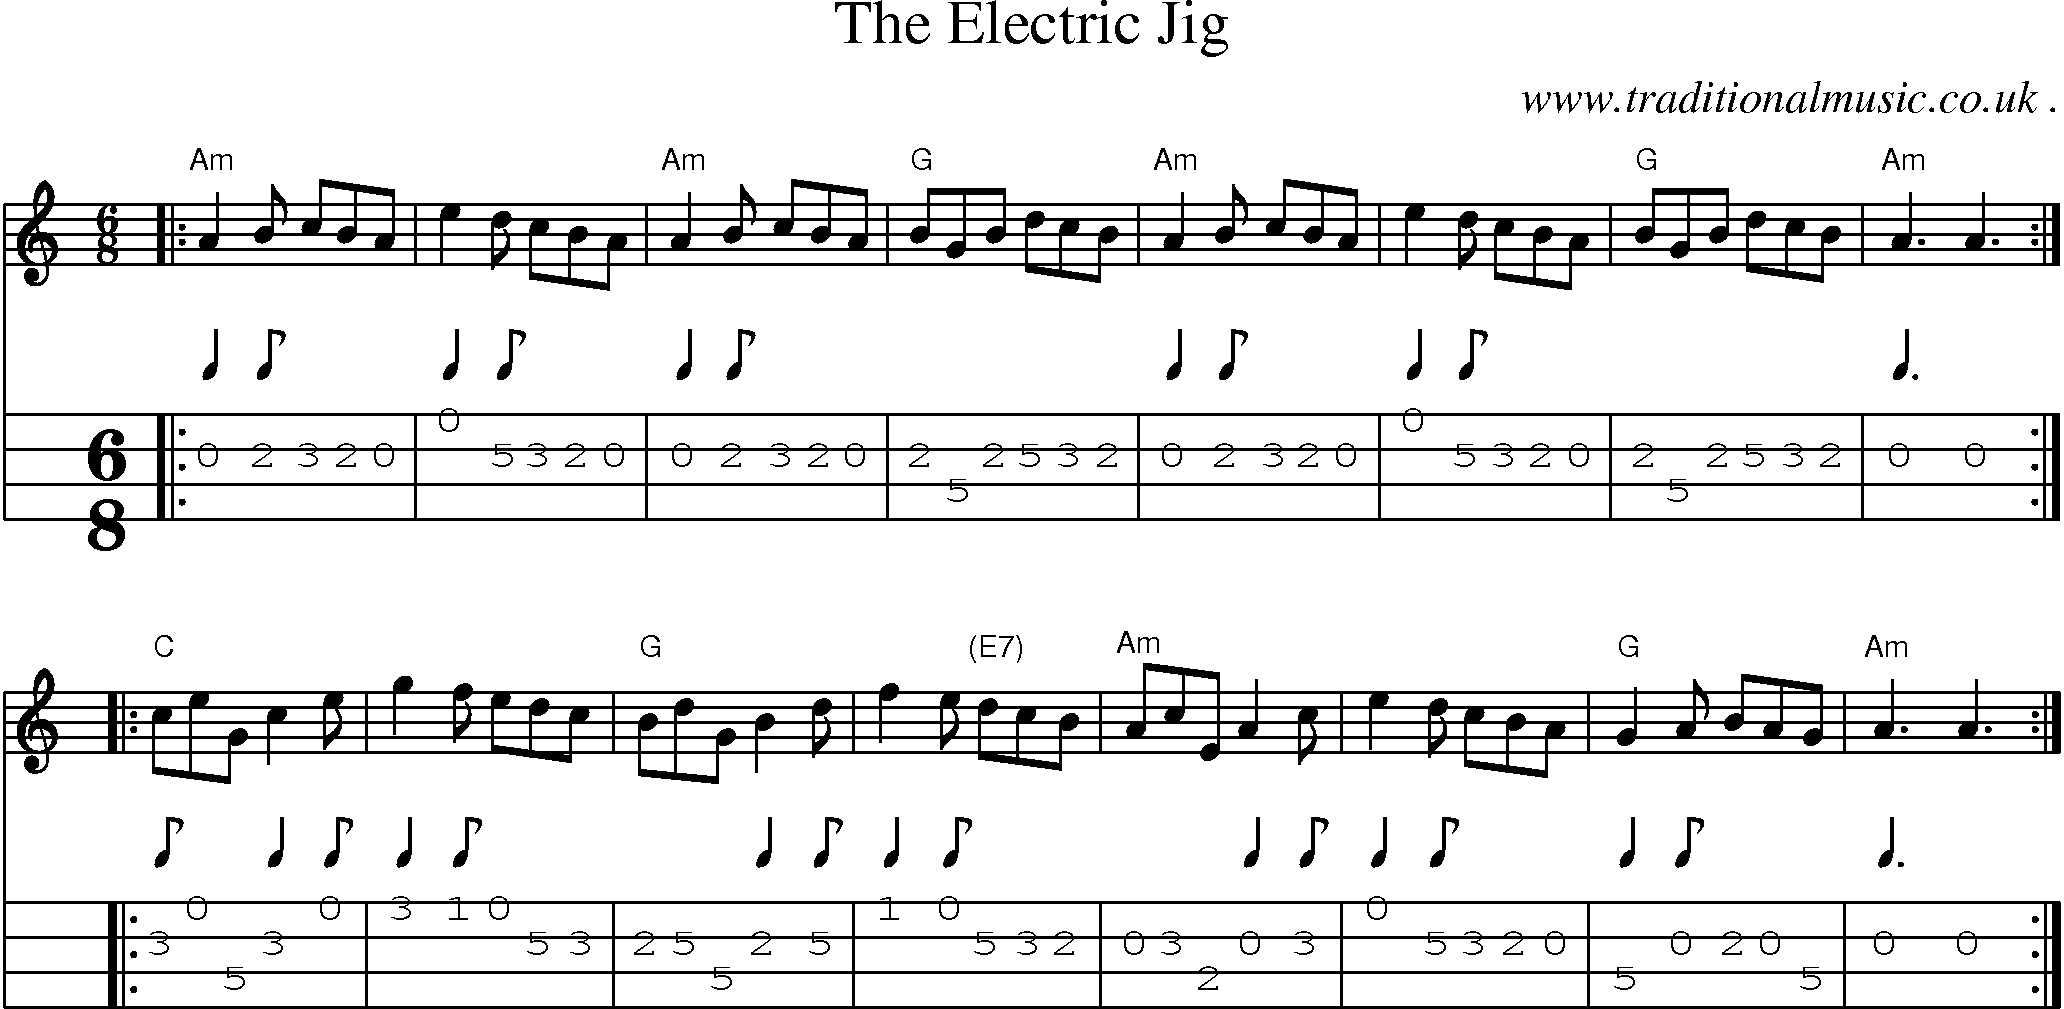 Sheet-music  score, Chords and Mandolin Tabs for The Electric Jig